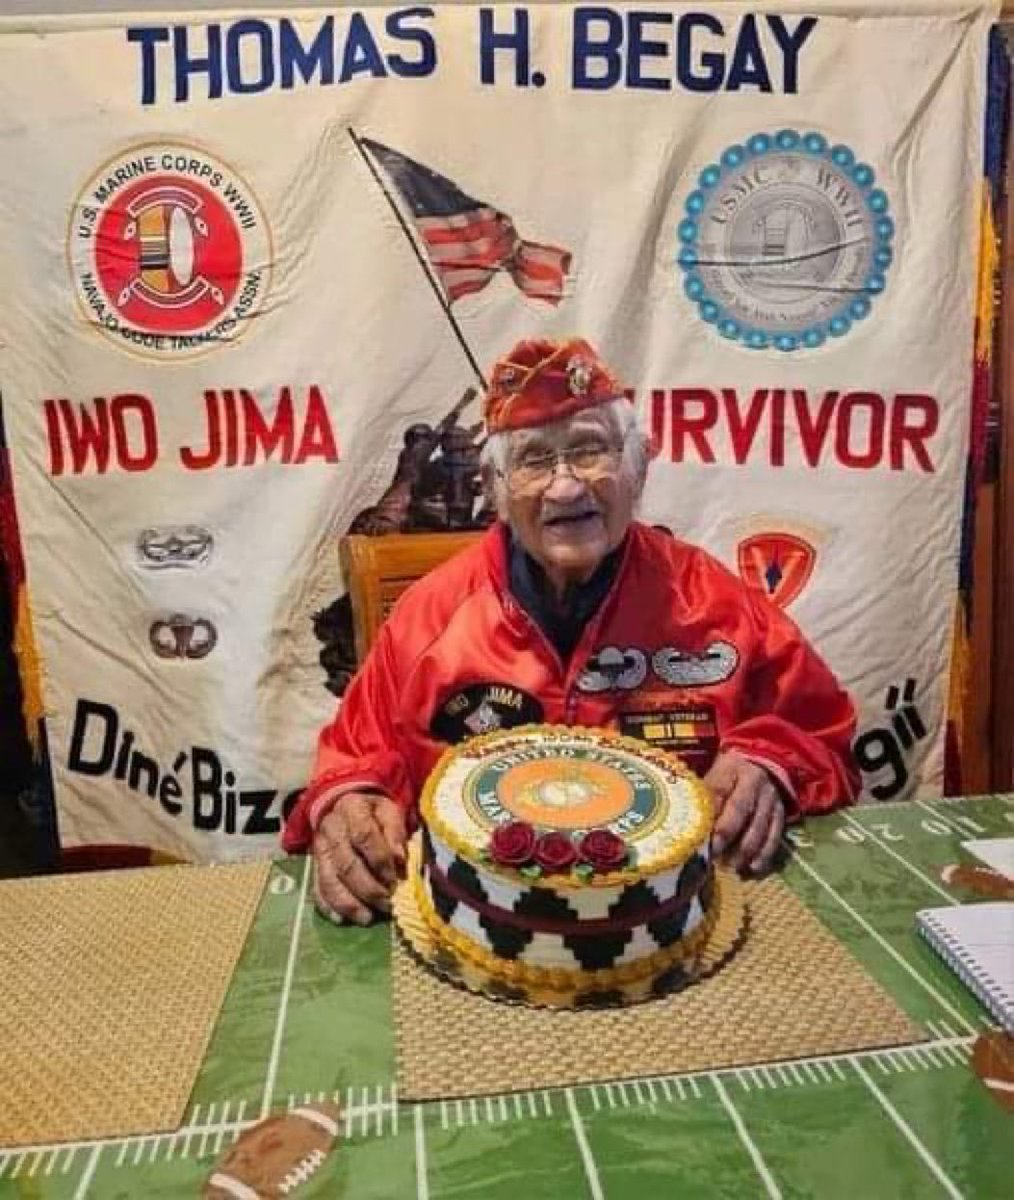 🇺🇸 Give it up to Thomas H. Begay, Navajo Code Talker, USMC, turns 100th 🇺🇸